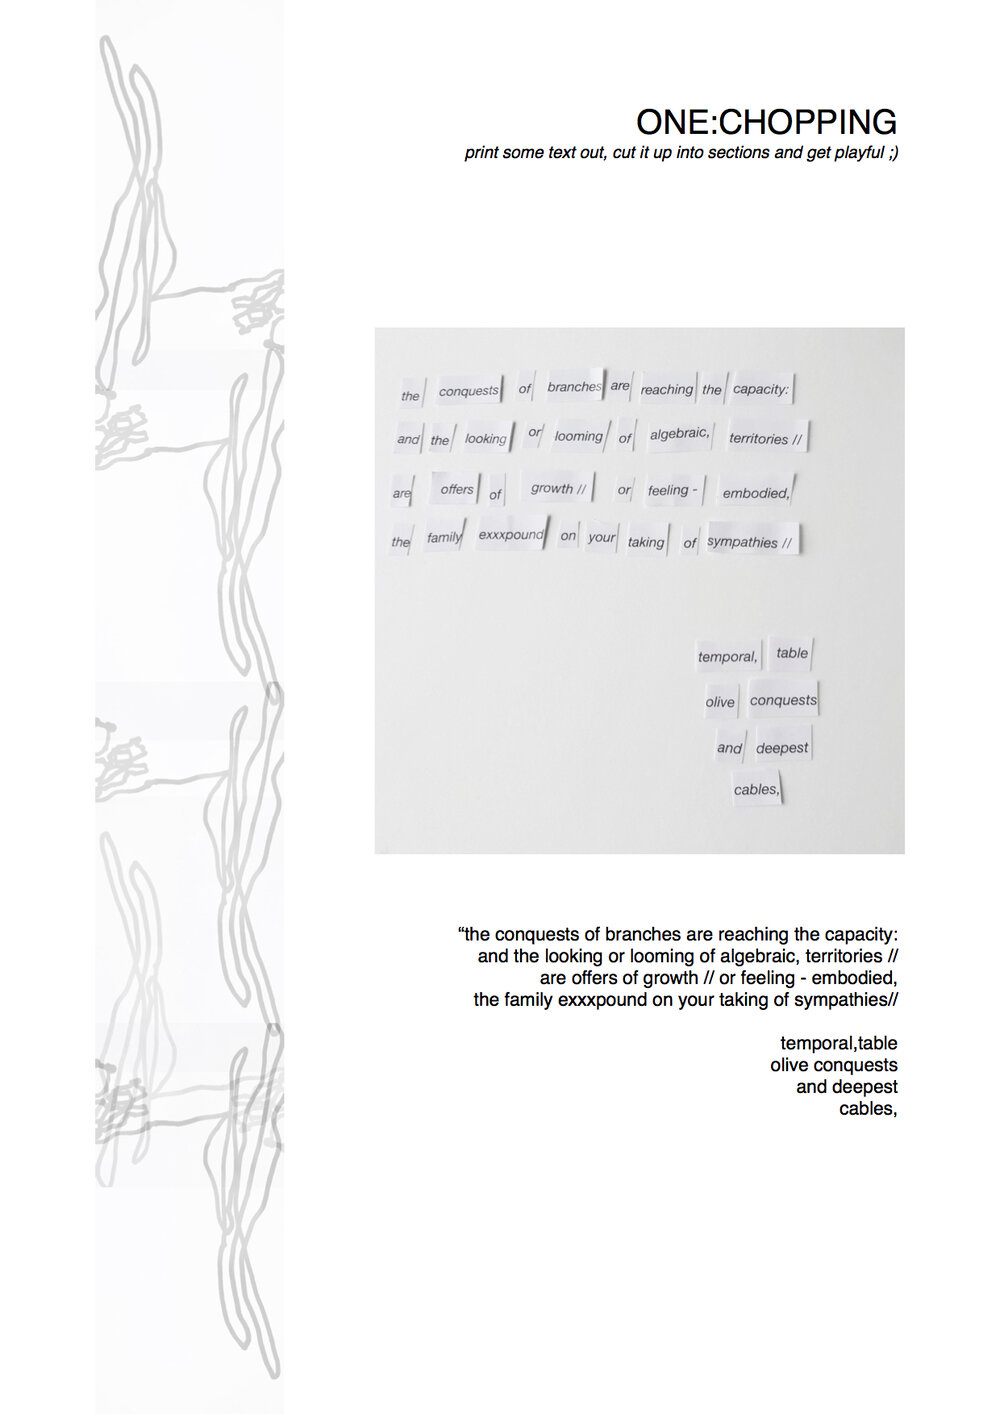  Title text reads: ‘ONE - CHOPPING. Print some text out, cut it up into sections and get playful’  Below is a photo of words cut out individually, that have been rearranged to form a new poem. The poem now reads: the conquests of branches are reachin